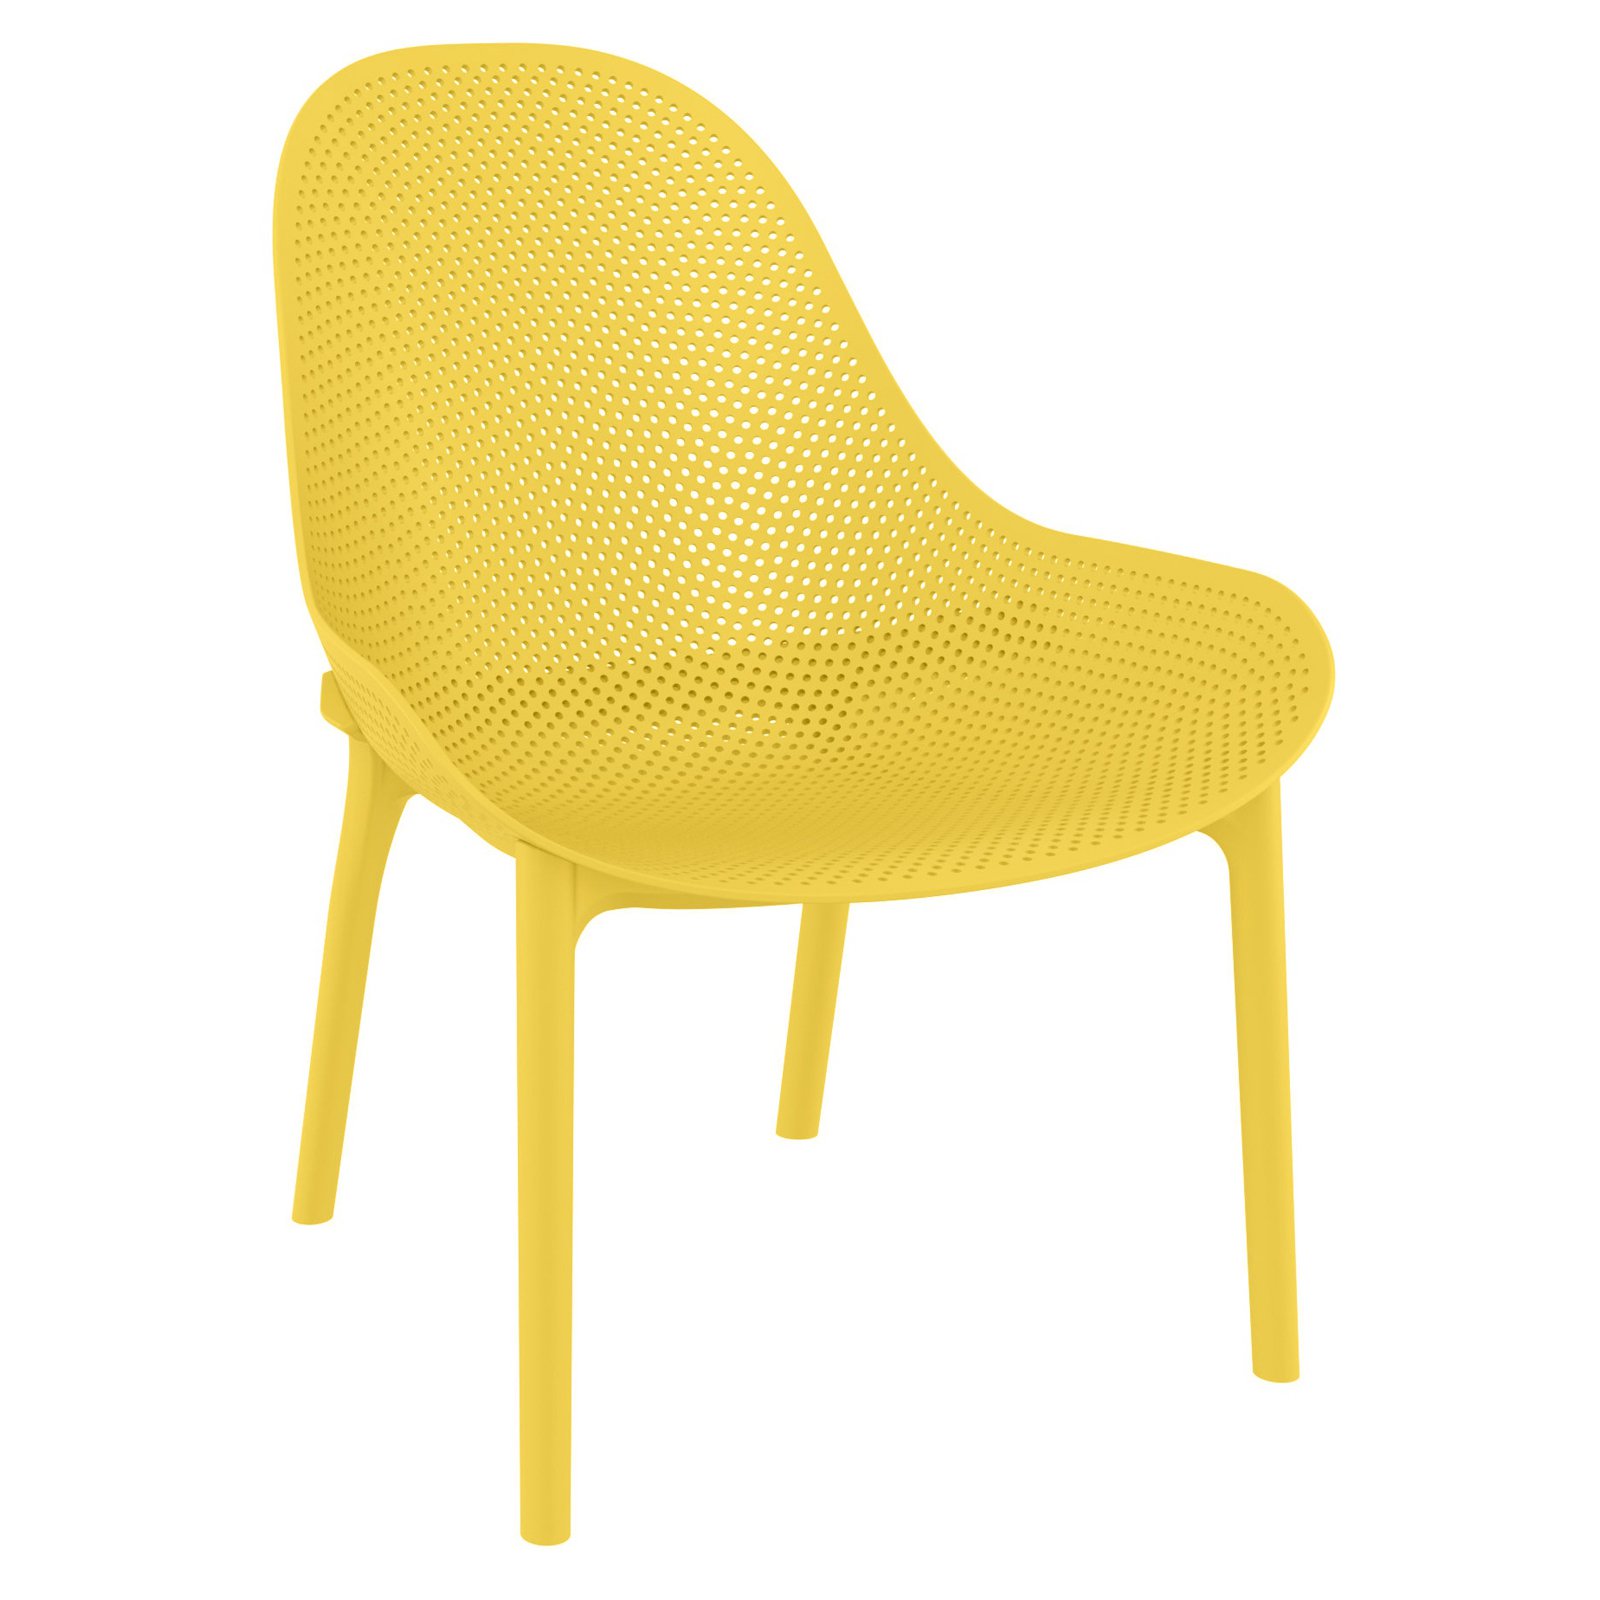 Compamia Sky Patio Chair in Yellow - image 2 of 11